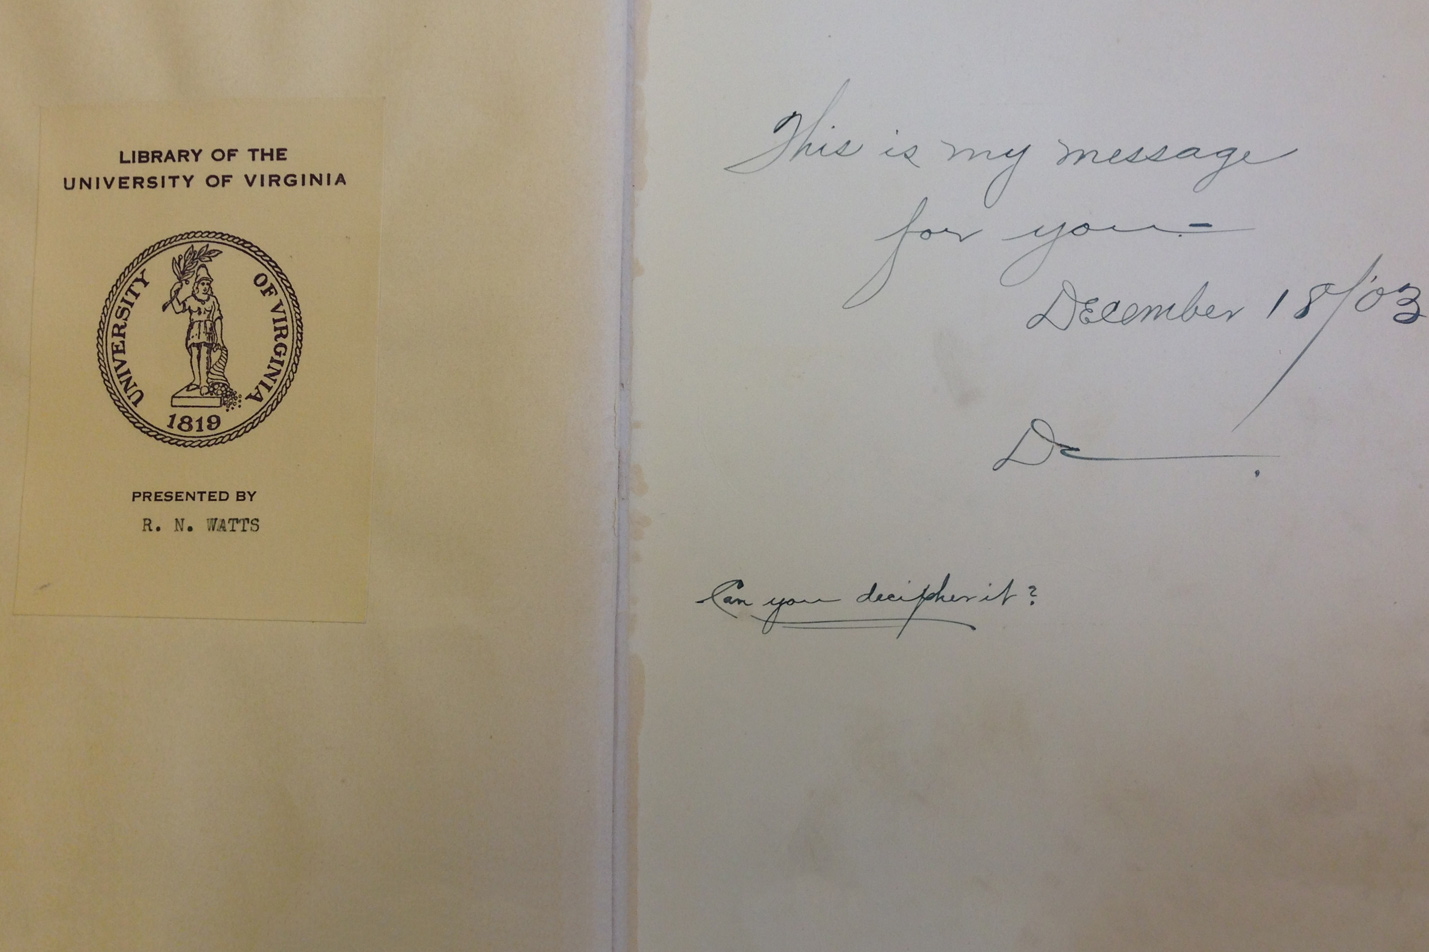 Handwritten note in a book in the UVA library